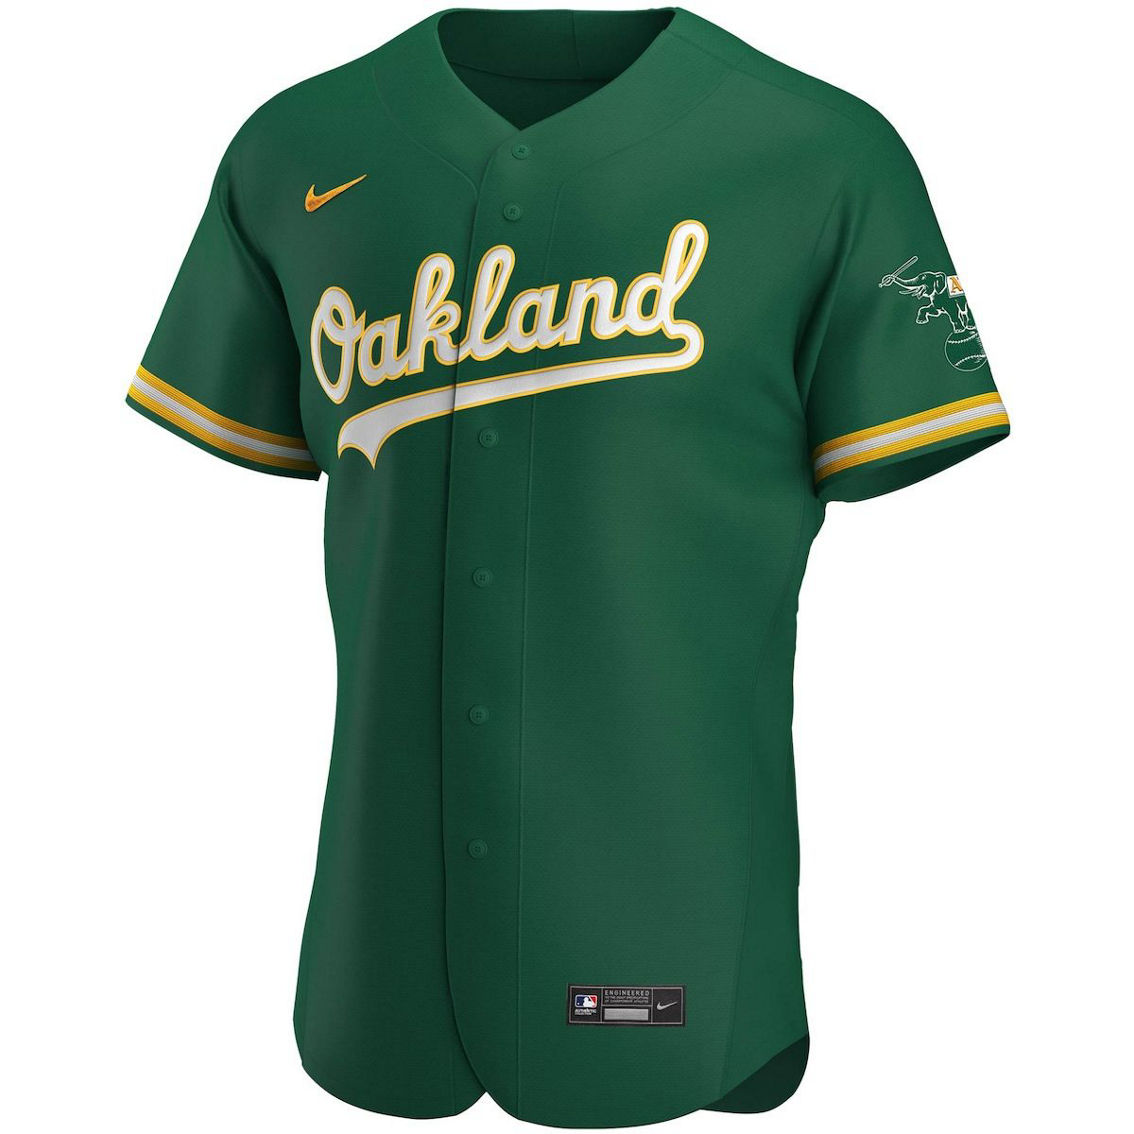 Nike Men's Kelly Green Oakland Athletics Authentic Team Jersey - Image 3 of 4